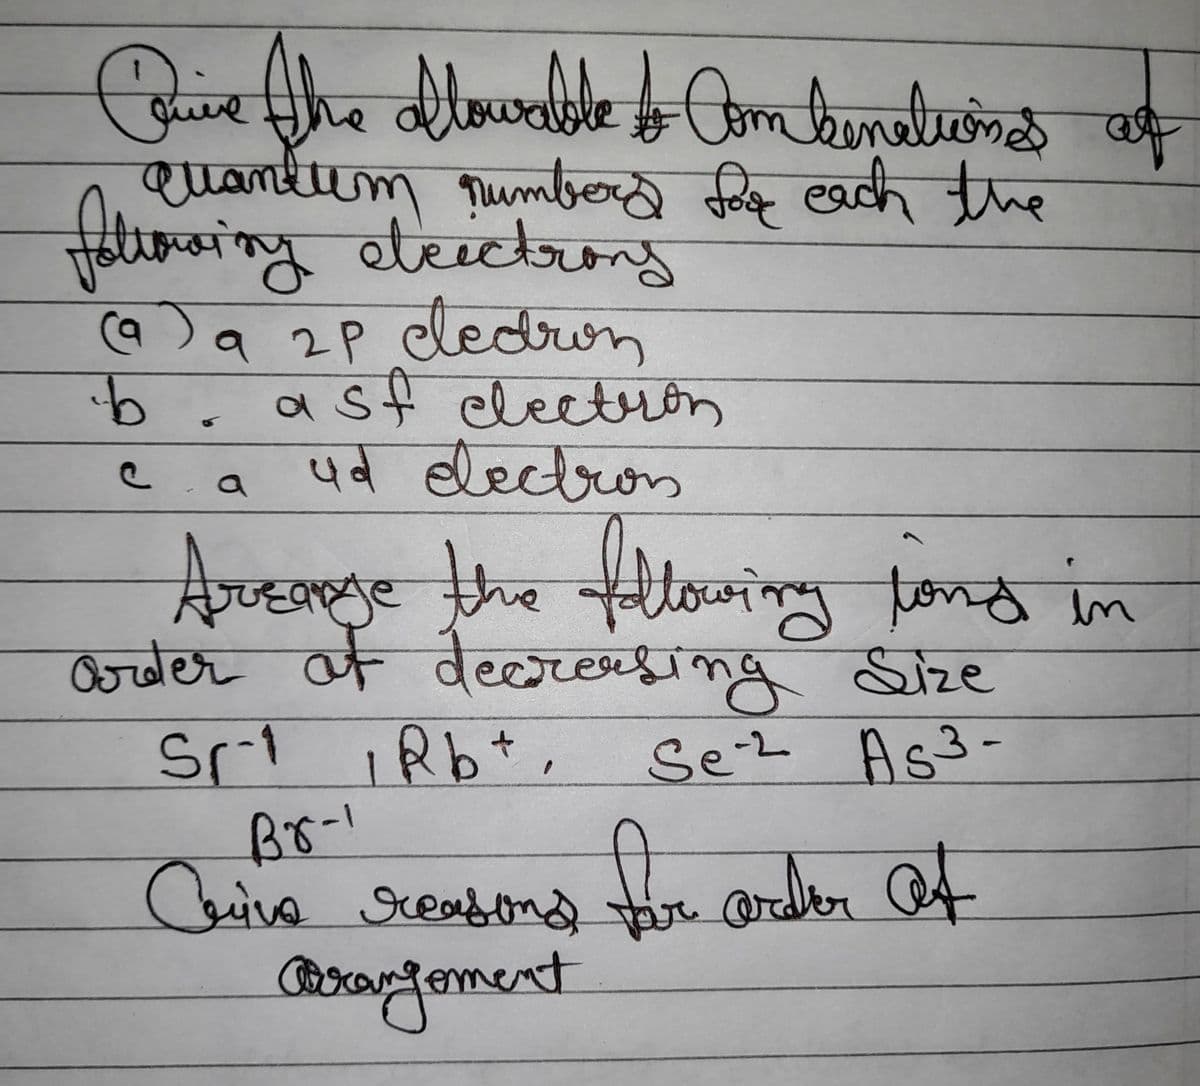 Quive the blowable to Combinationes at
quantum number for each the
following electrons
b
(a) a 2P cedron
asf electron
ud electron
c
a
Arease the following land in
arder at decreasing Size
Sr.1 Rb+, Se-2 As³-
Br-1
Cine reasons for ander of
Prangoment
14